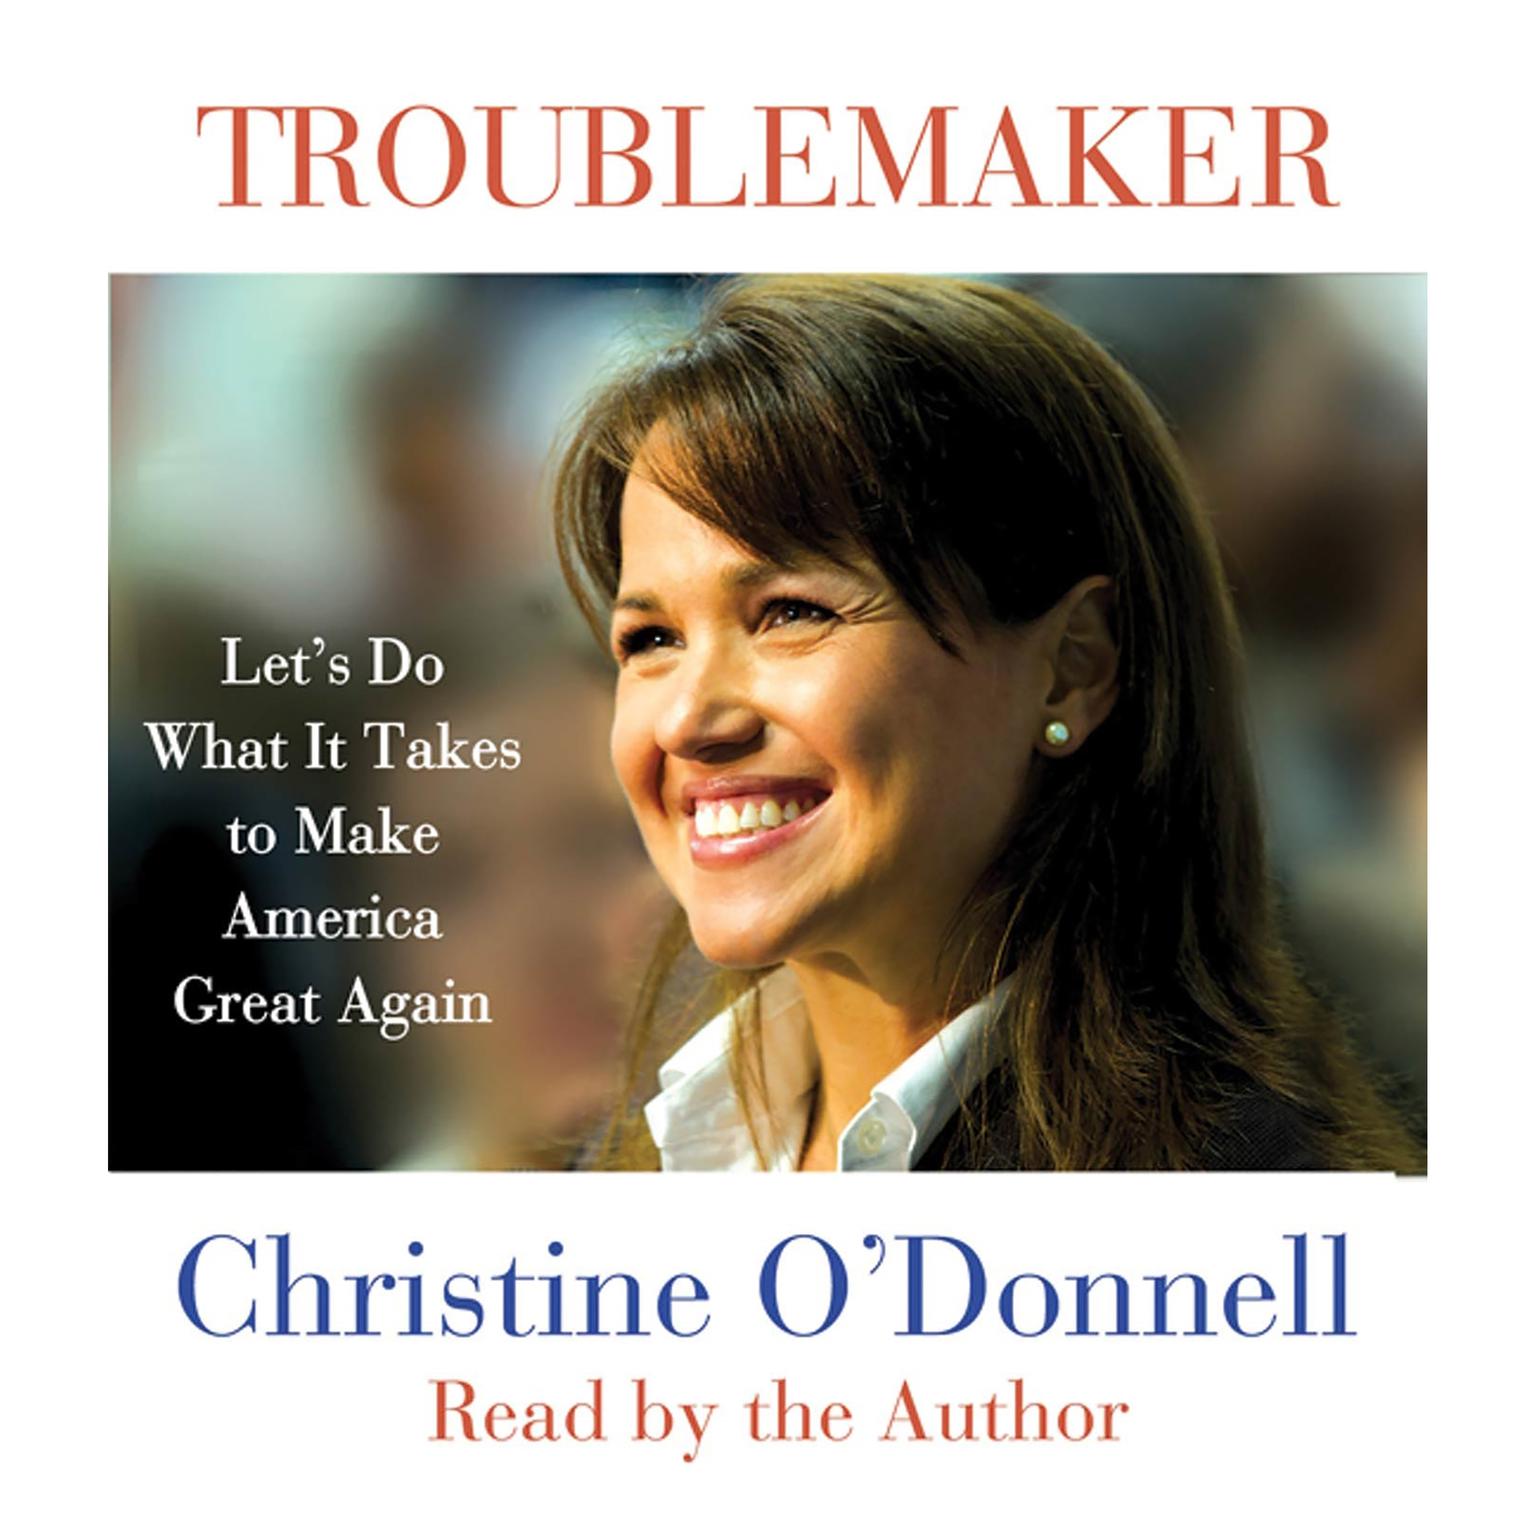 Troublemaker (Abridged): Lets Do What It Takes to Make America Great Again Audiobook, by Christine O'Donnell